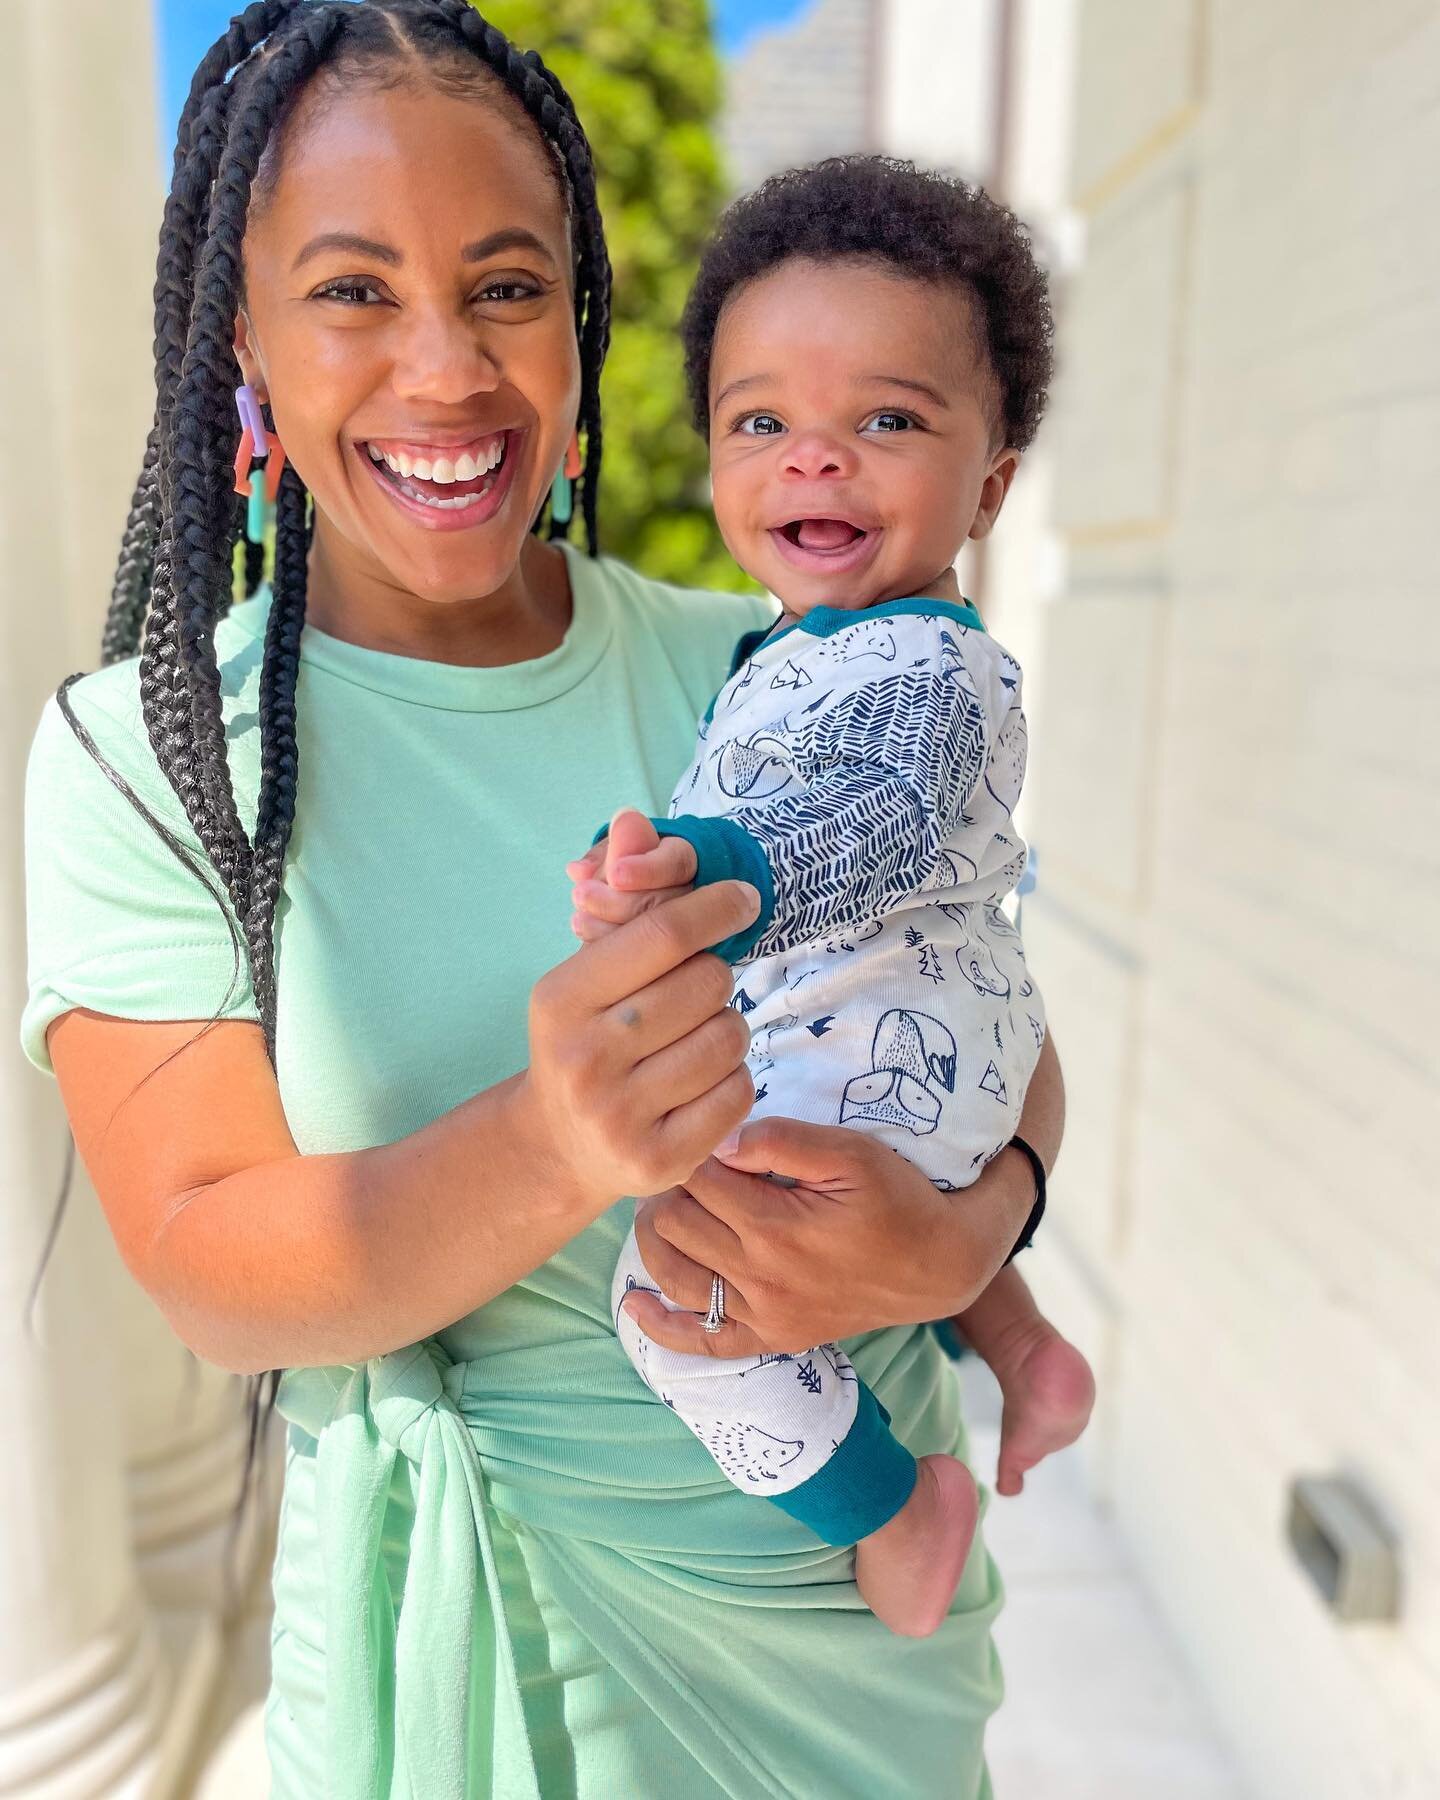 😁Friday smiles from me and Legend! Check out the last slide to hear all the sounds his Nana made to make him giggle and smile for the perfect picture LOL😆#boymom #momentswithmajesty